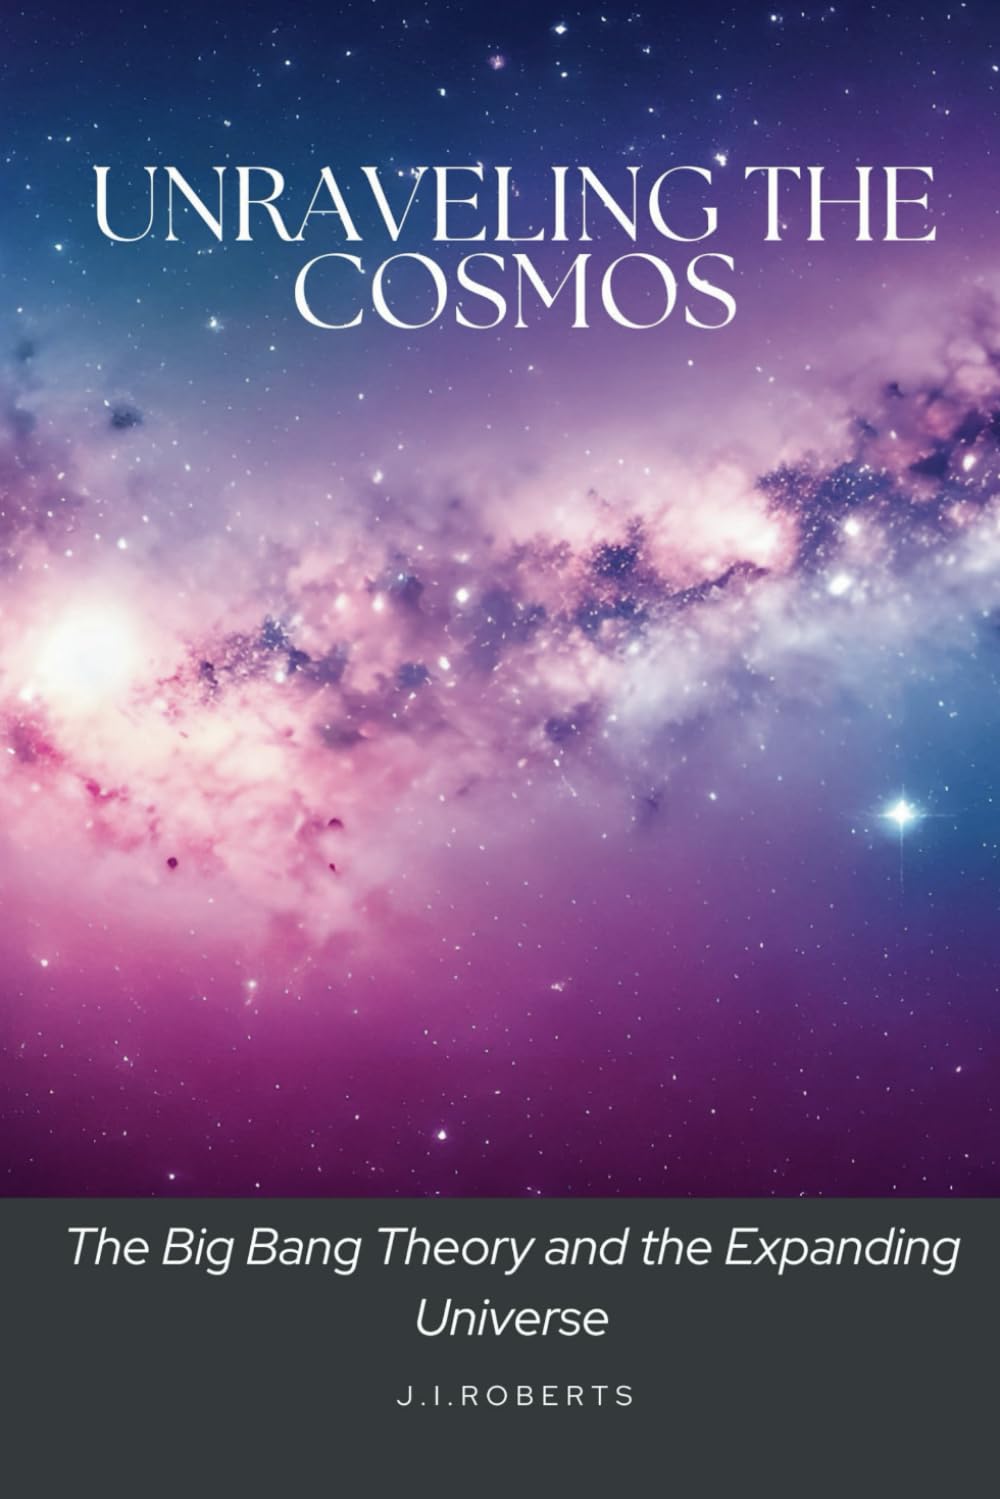 Unraveling the Cosmos: The Big Bang Theory and the Expanding Universe